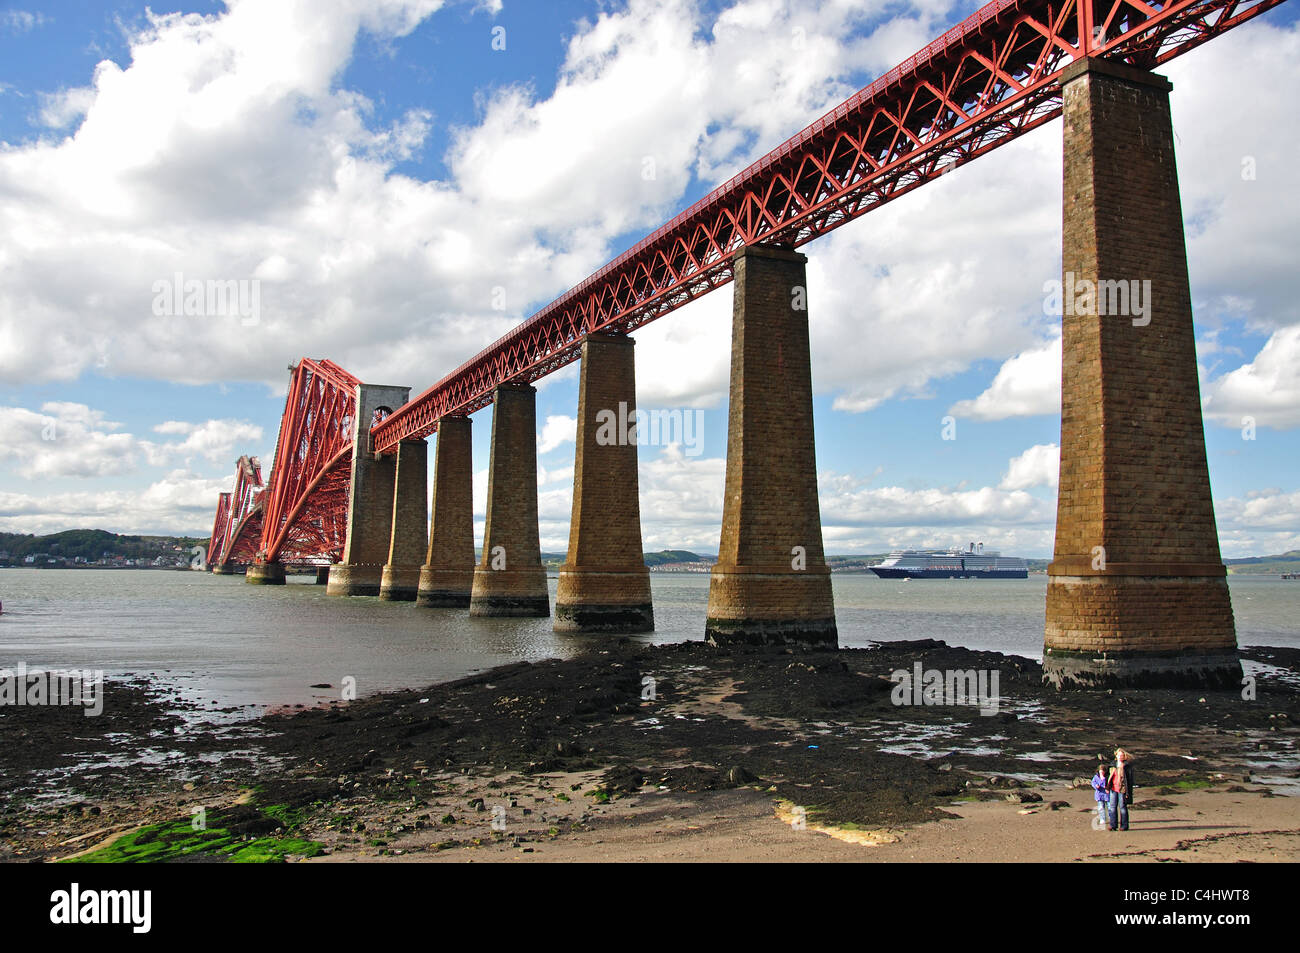 Forth Bridge de South Queensferry, Firth of Forth, Lothian, Ecosse, Royaume-Uni Banque D'Images